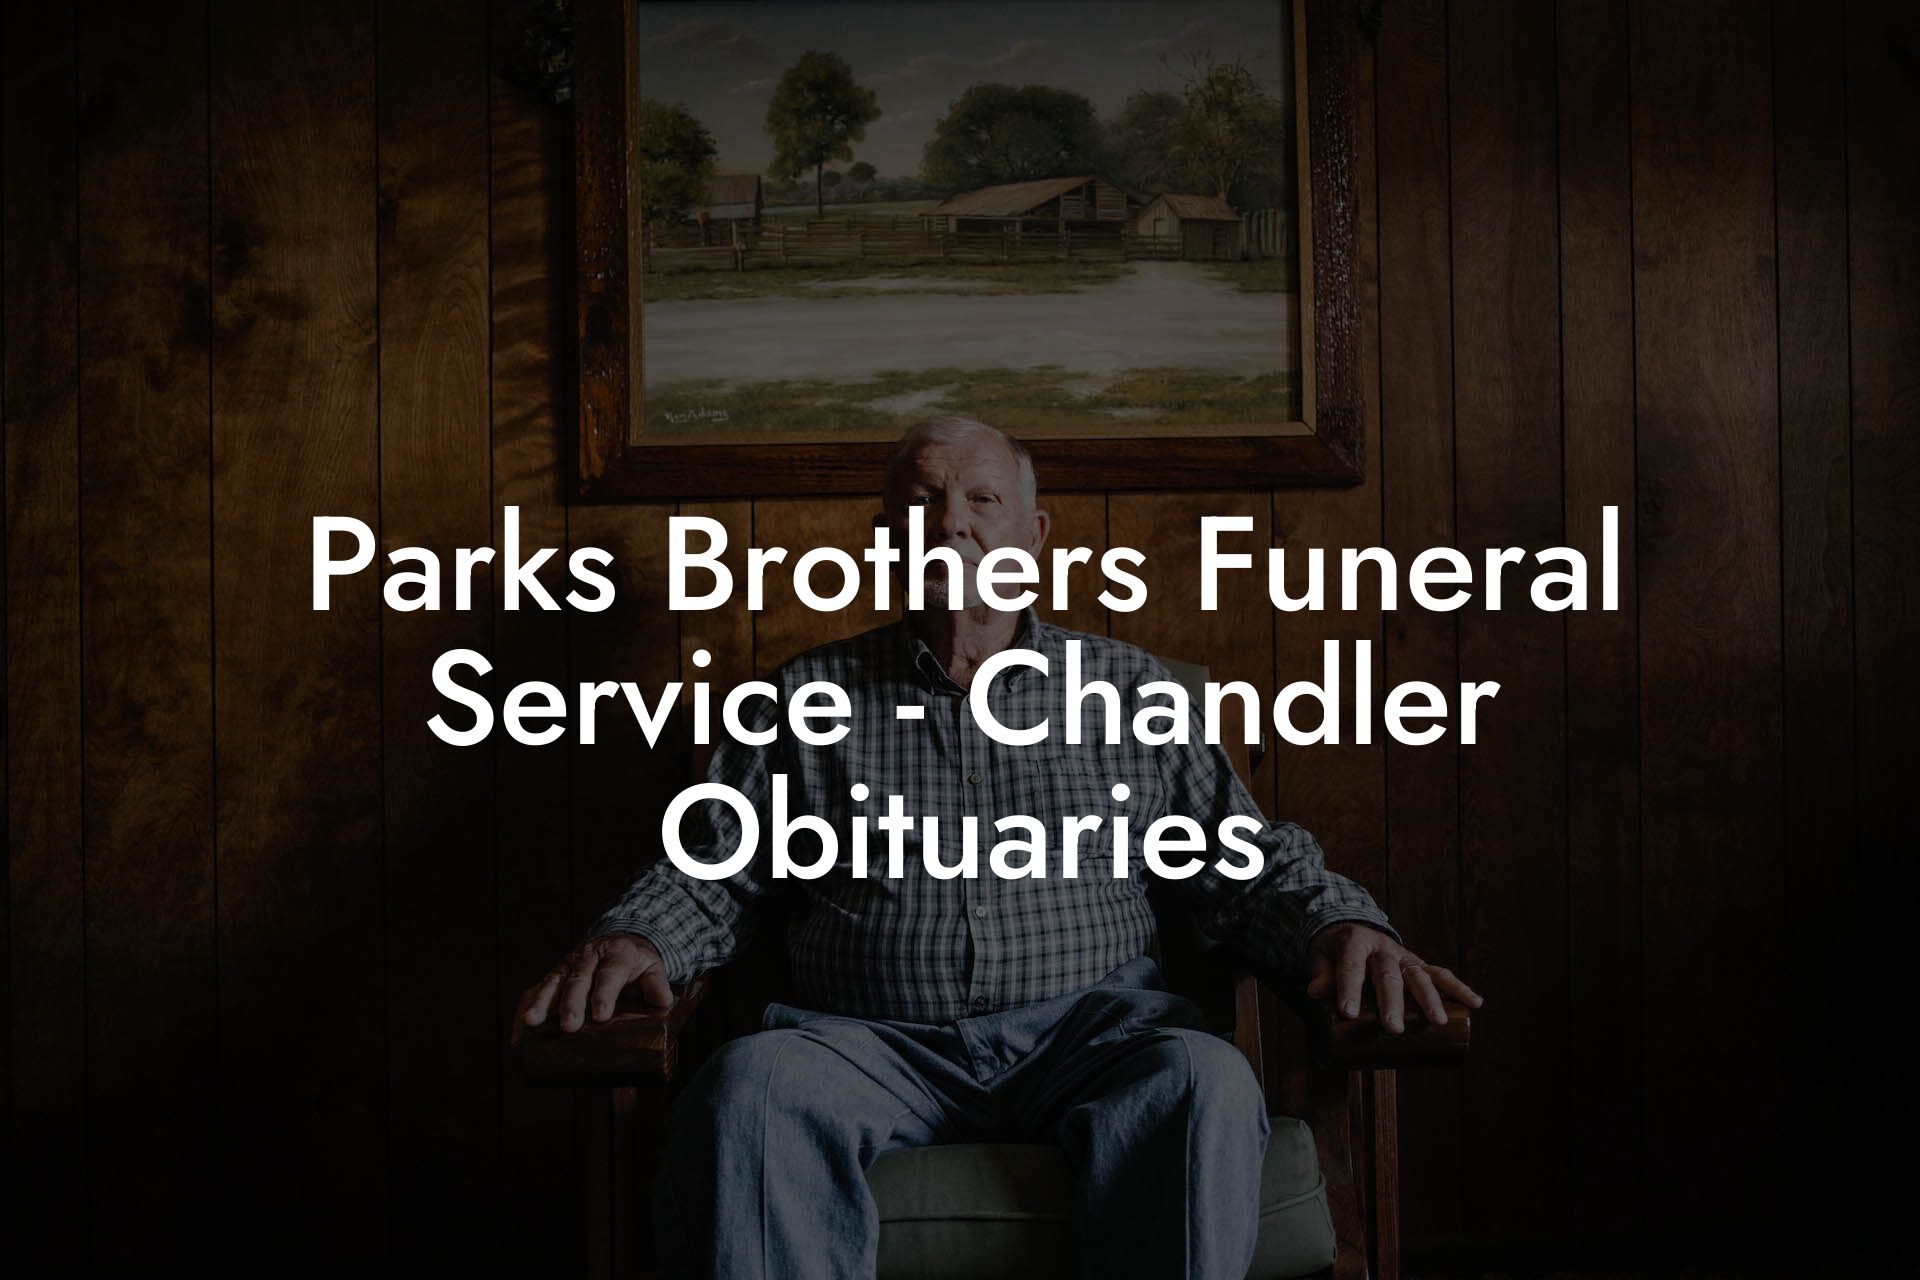 Parks Brothers Funeral Service - Chandler Obituaries